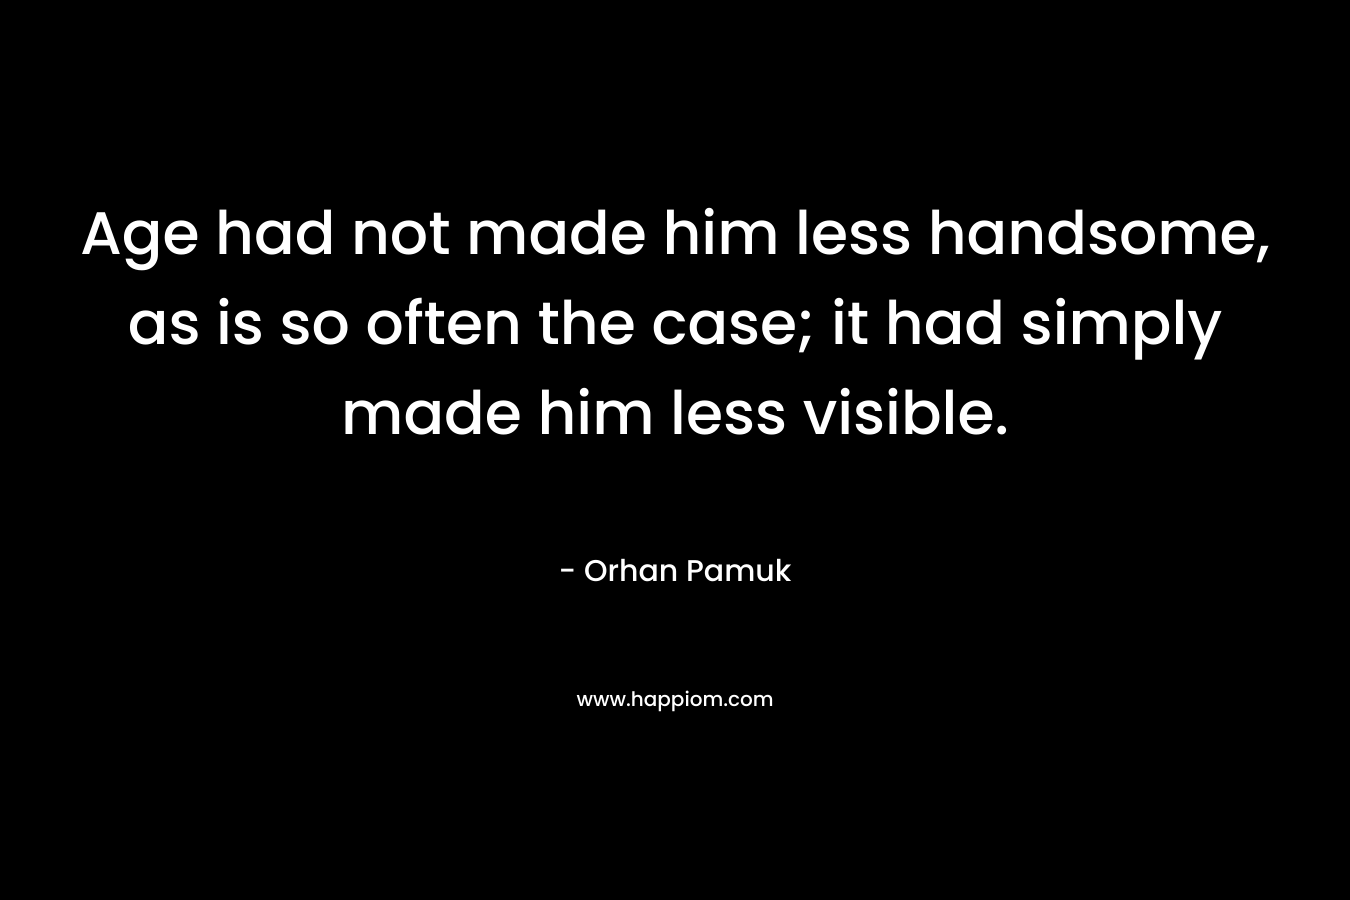 Age had not made him less handsome, as is so often the case; it had simply made him less visible. – Orhan Pamuk